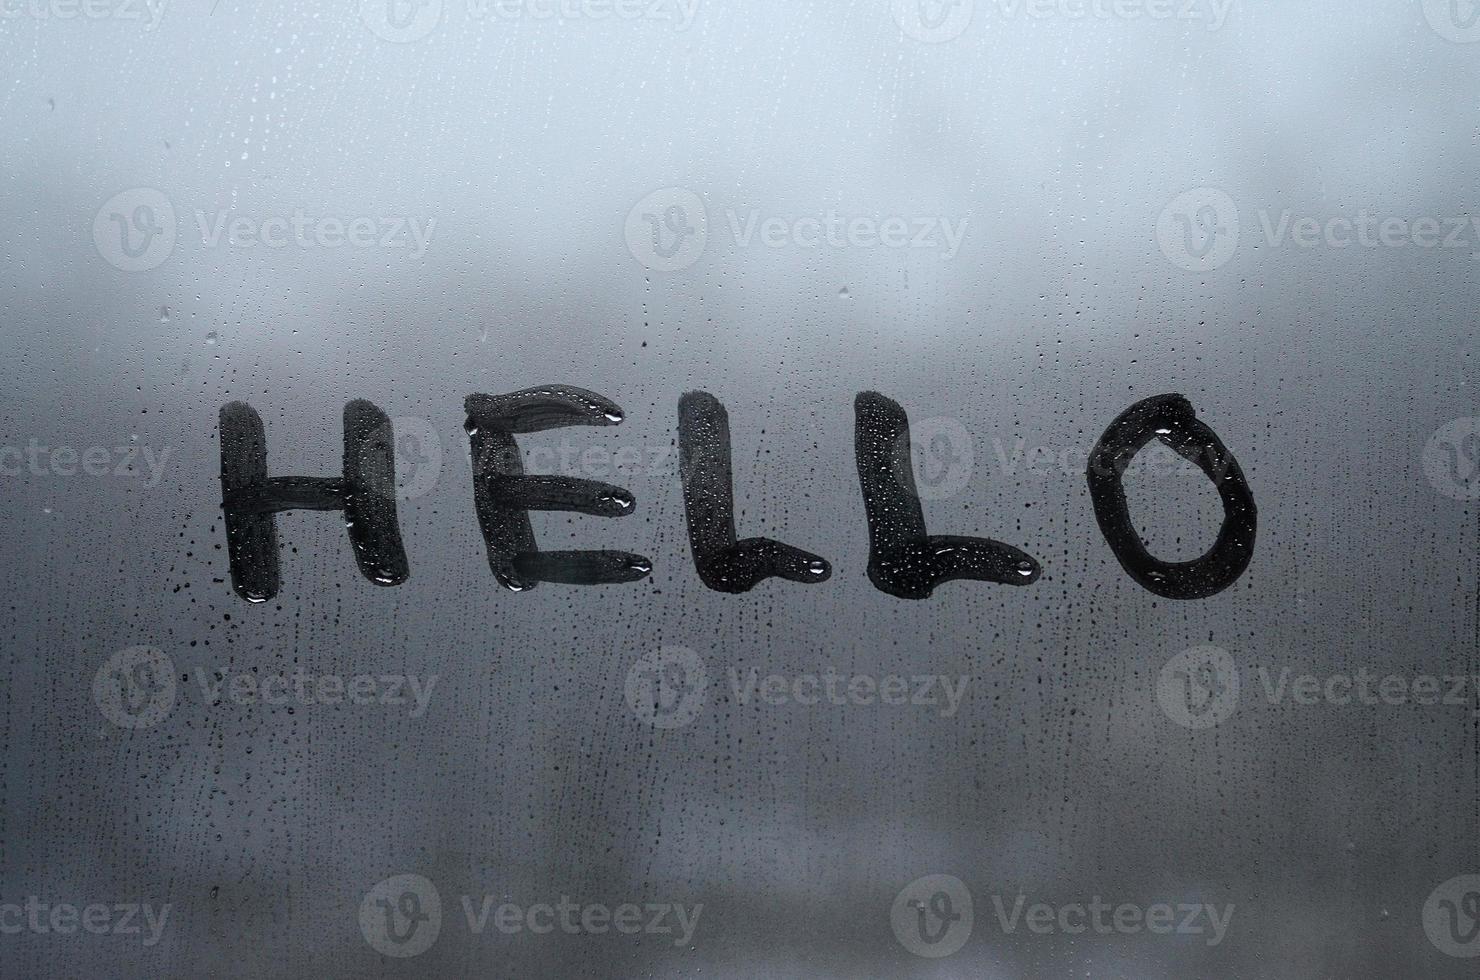 The English word Hello is written with a finger on the surface of the misted glass photo